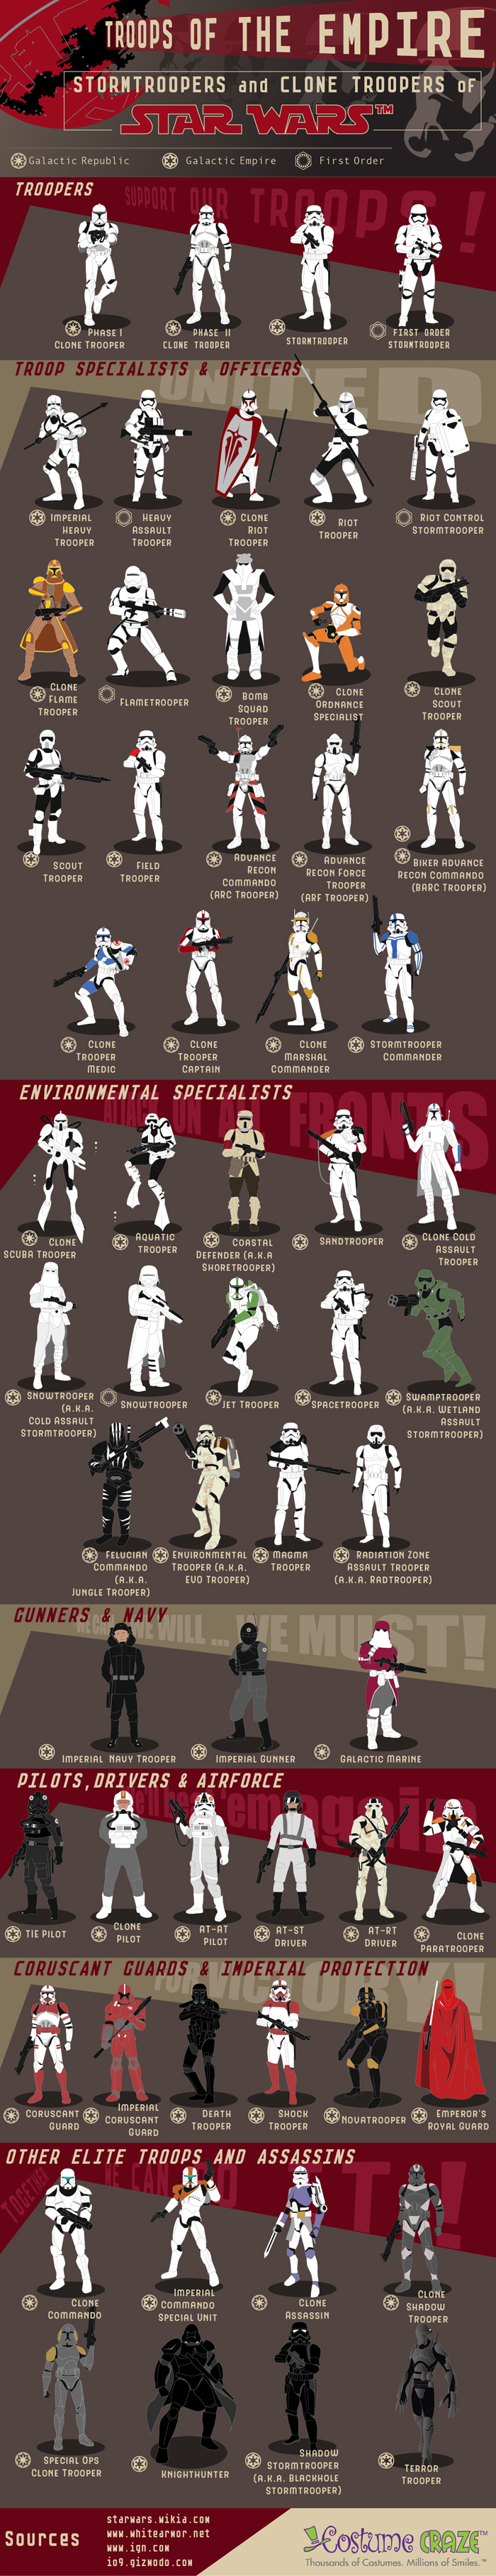 Stormtroopers and Clone Troopers of Star Wars